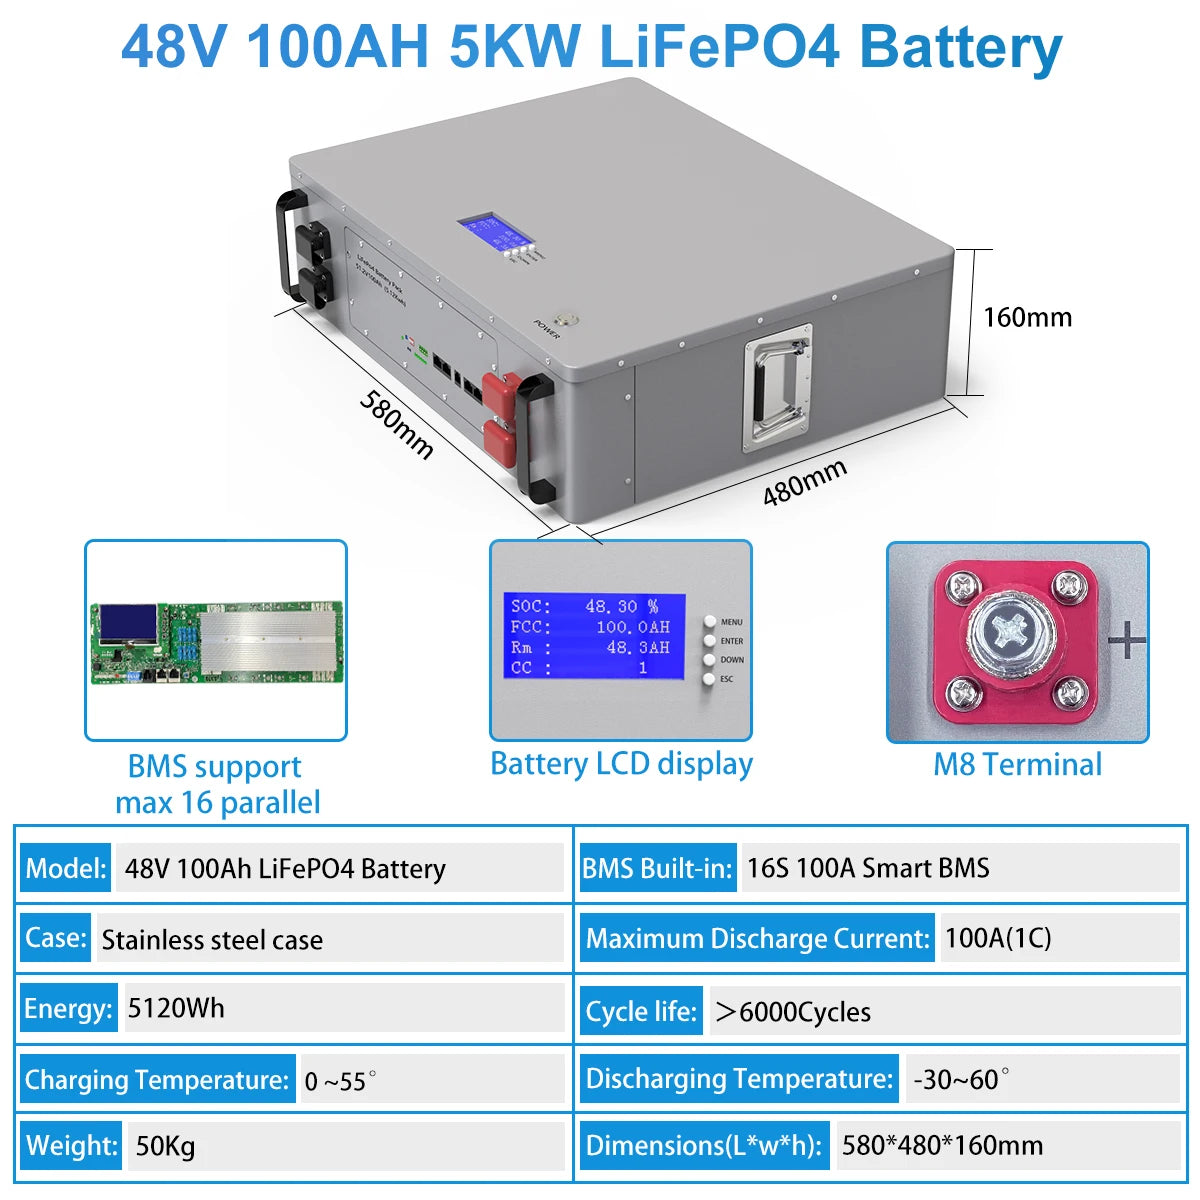 Powerwall LiFePO4 48V 100AH 5KW Battery, Powerwall LiFePO4 battery pack with 48V, 100AH, and 5kW capacity for off-grid solar power systems.